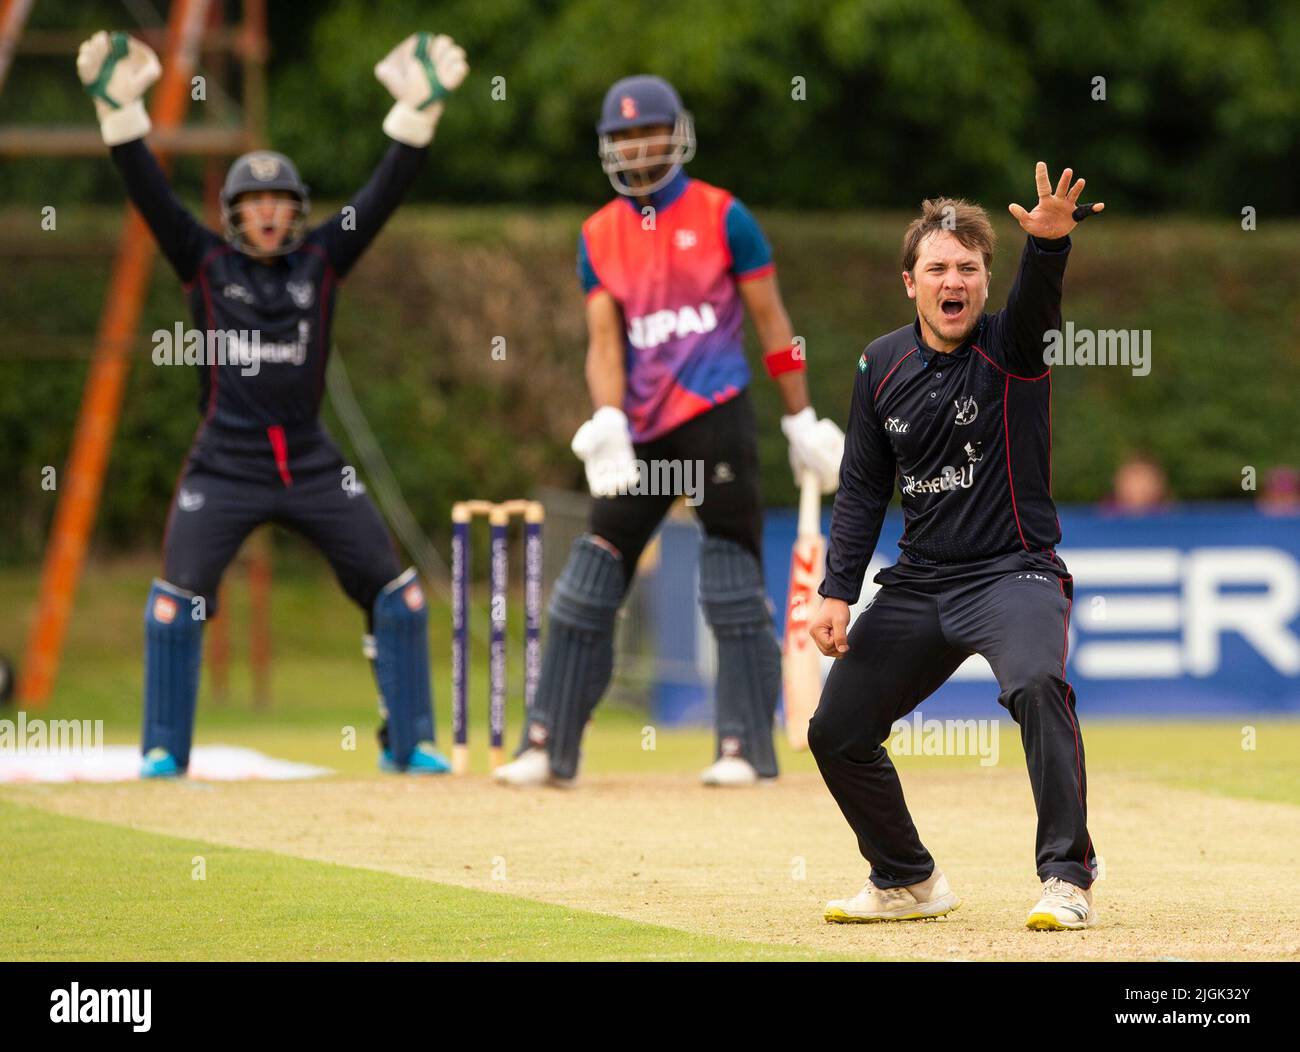 ICC Men's Cricket World Cup League 2 - Nepal v, Namibia. 10th July, 2022. Nepal take on Namibia in the ICC Men's Cricket World Cup League 2 at Cambusdoon, Ayr. Pic shows: Big appeal by Namibia's Jan Nicol Loftie-Eaton, Credit: Ian Jacobs/Alamy Live News Stock Photo